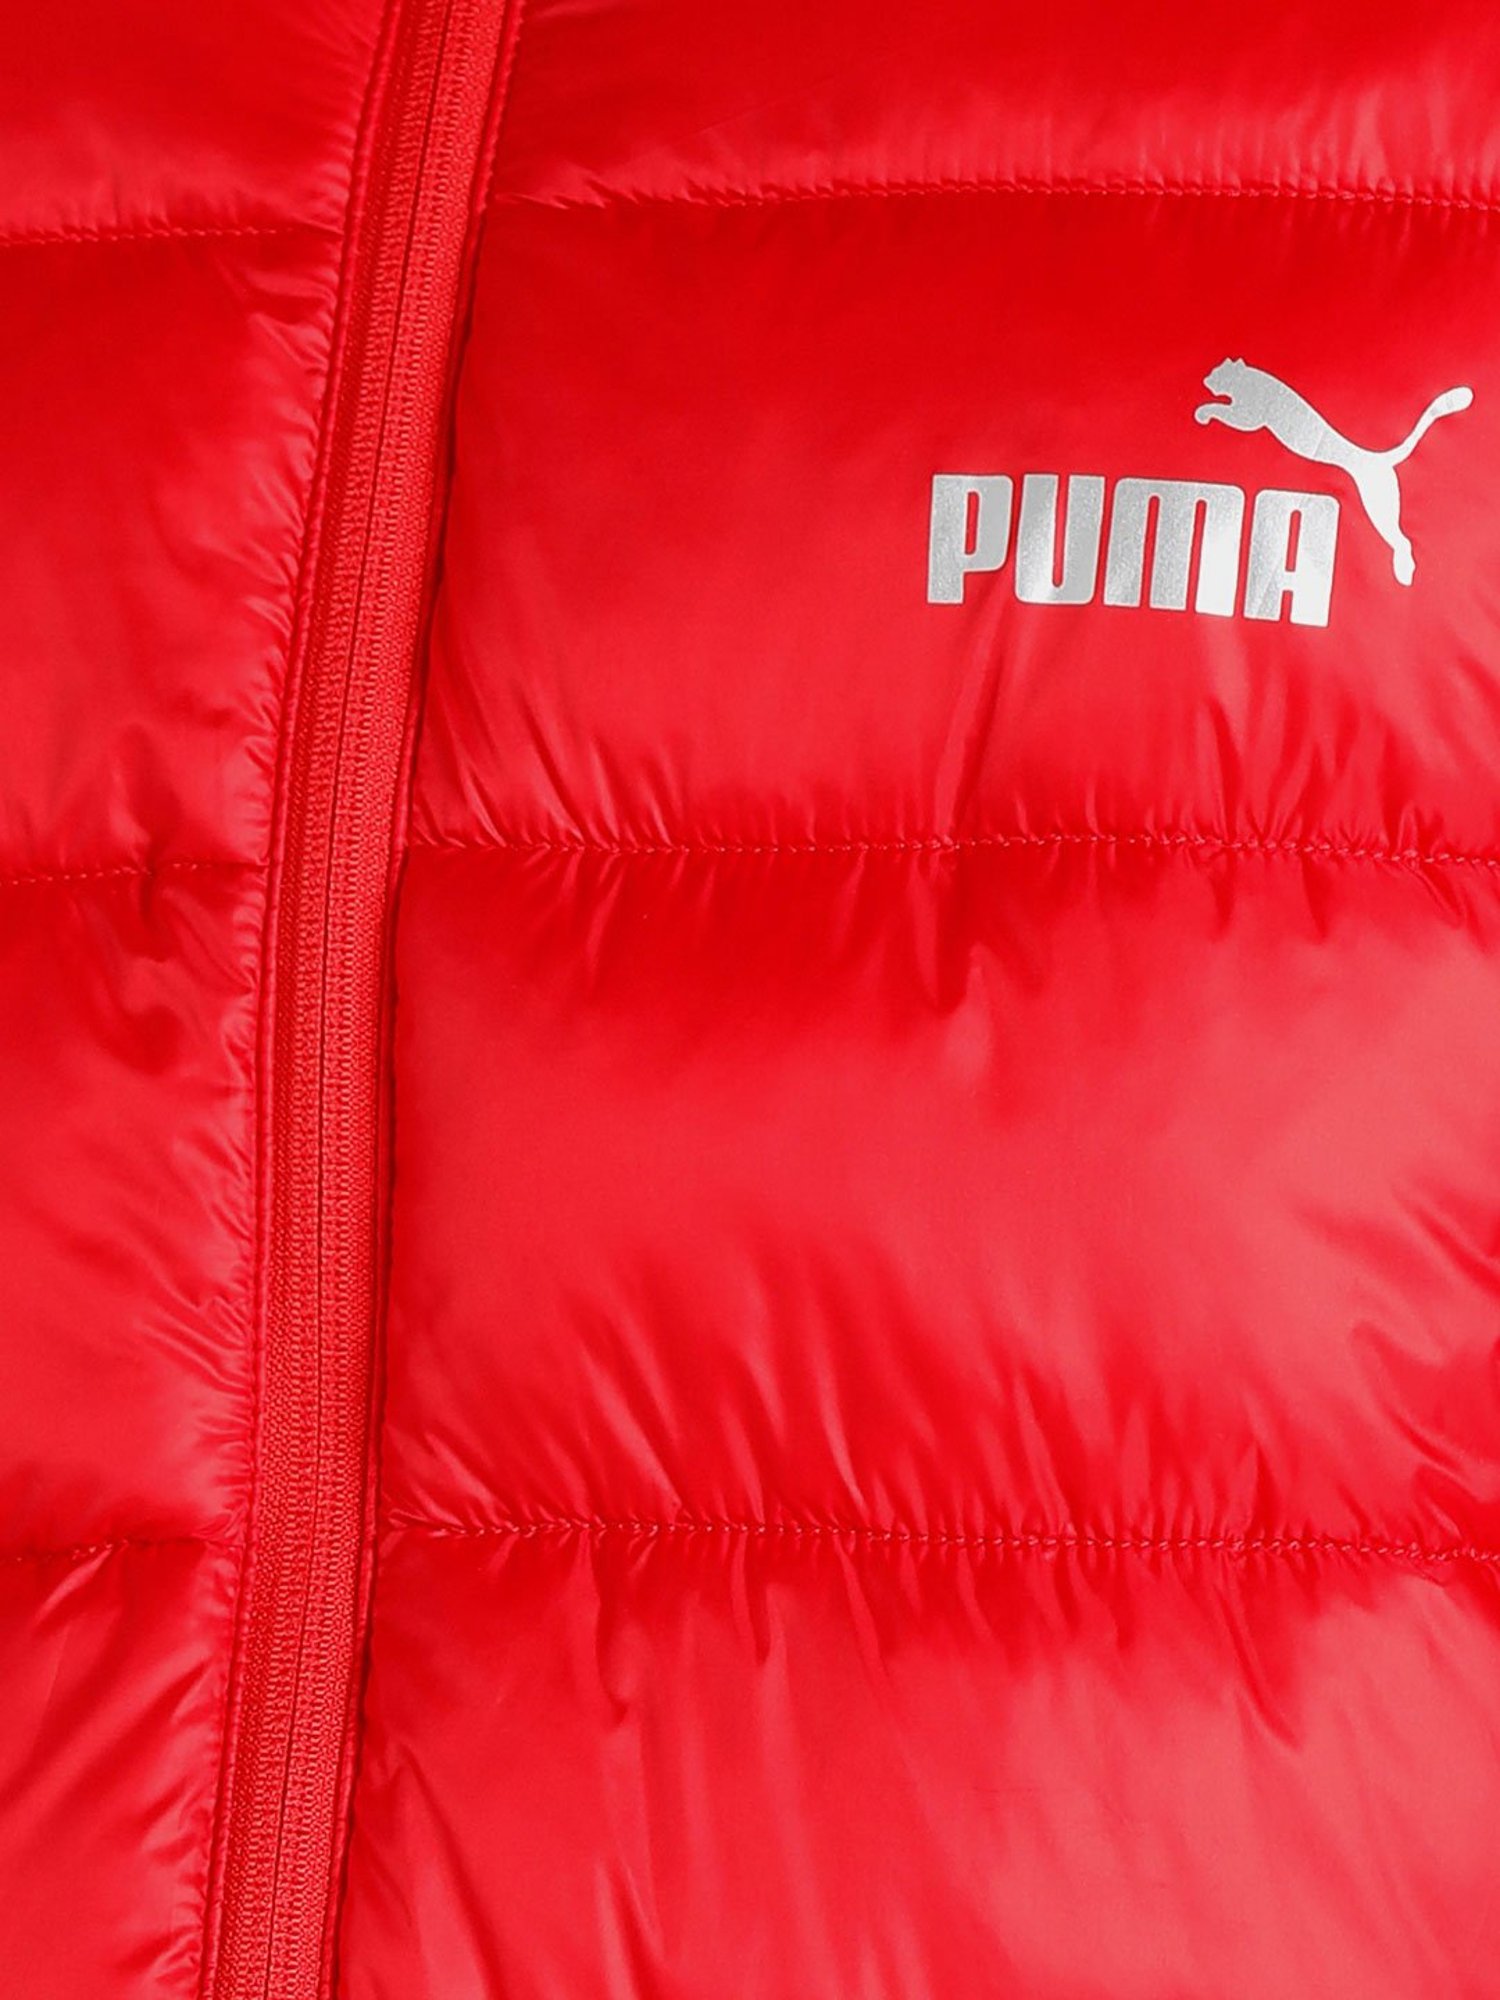 Puma Red Jacket - Buy Puma Red Jacket online in India